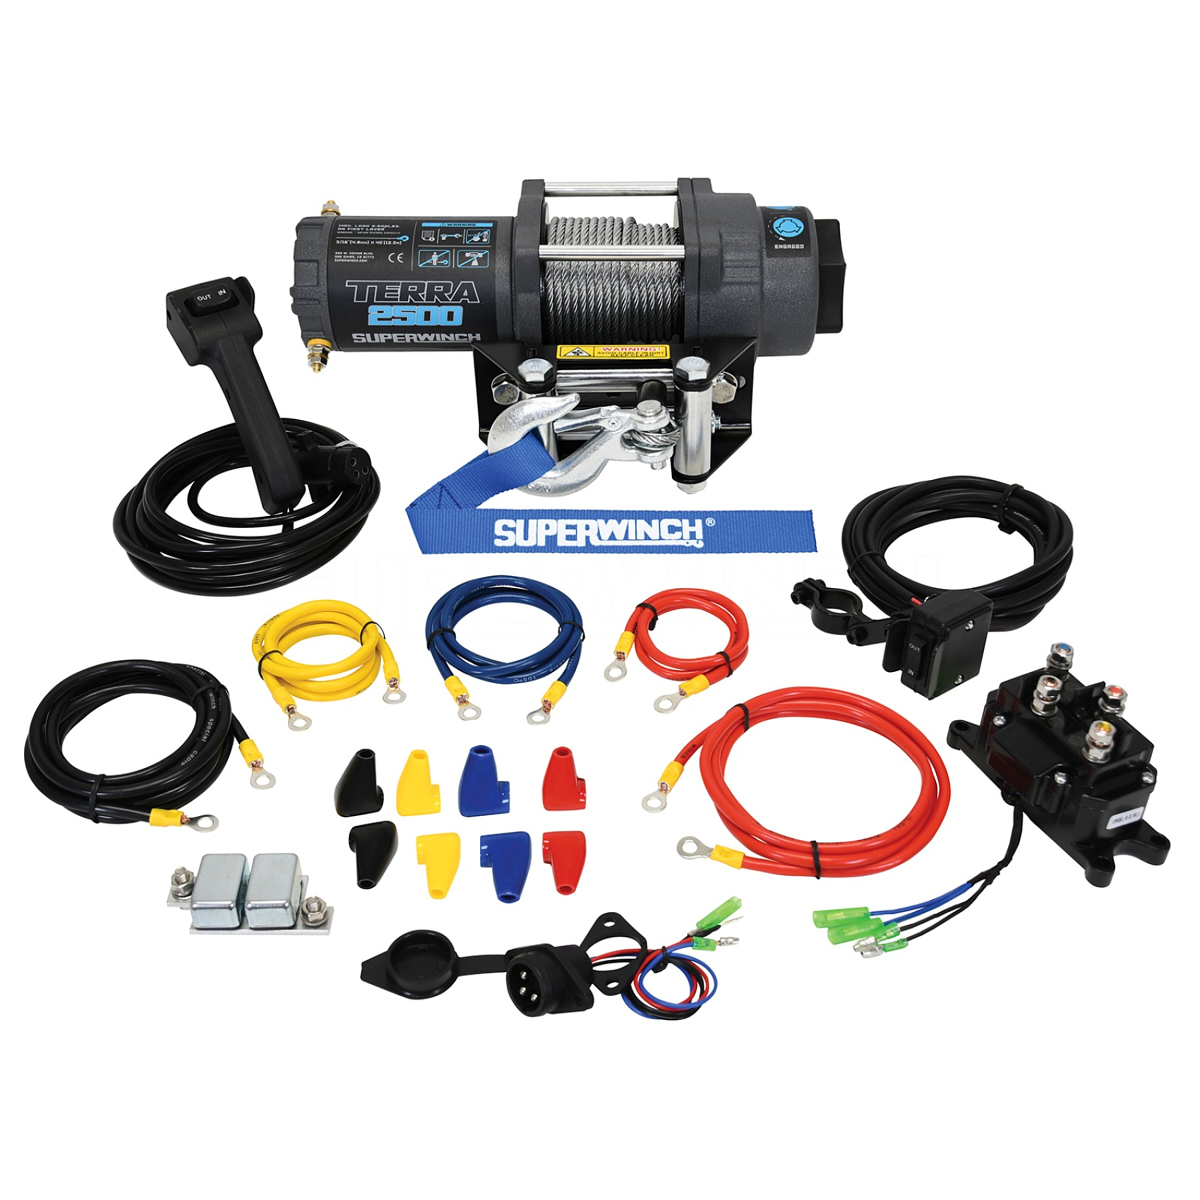 SuperWinch 1125260 Winch, Terra, 2500 lb Capacity, Roller Fairlead, 10 ft Remote, 3/16 in x 40 ft Steel Rope, 12V, Kit